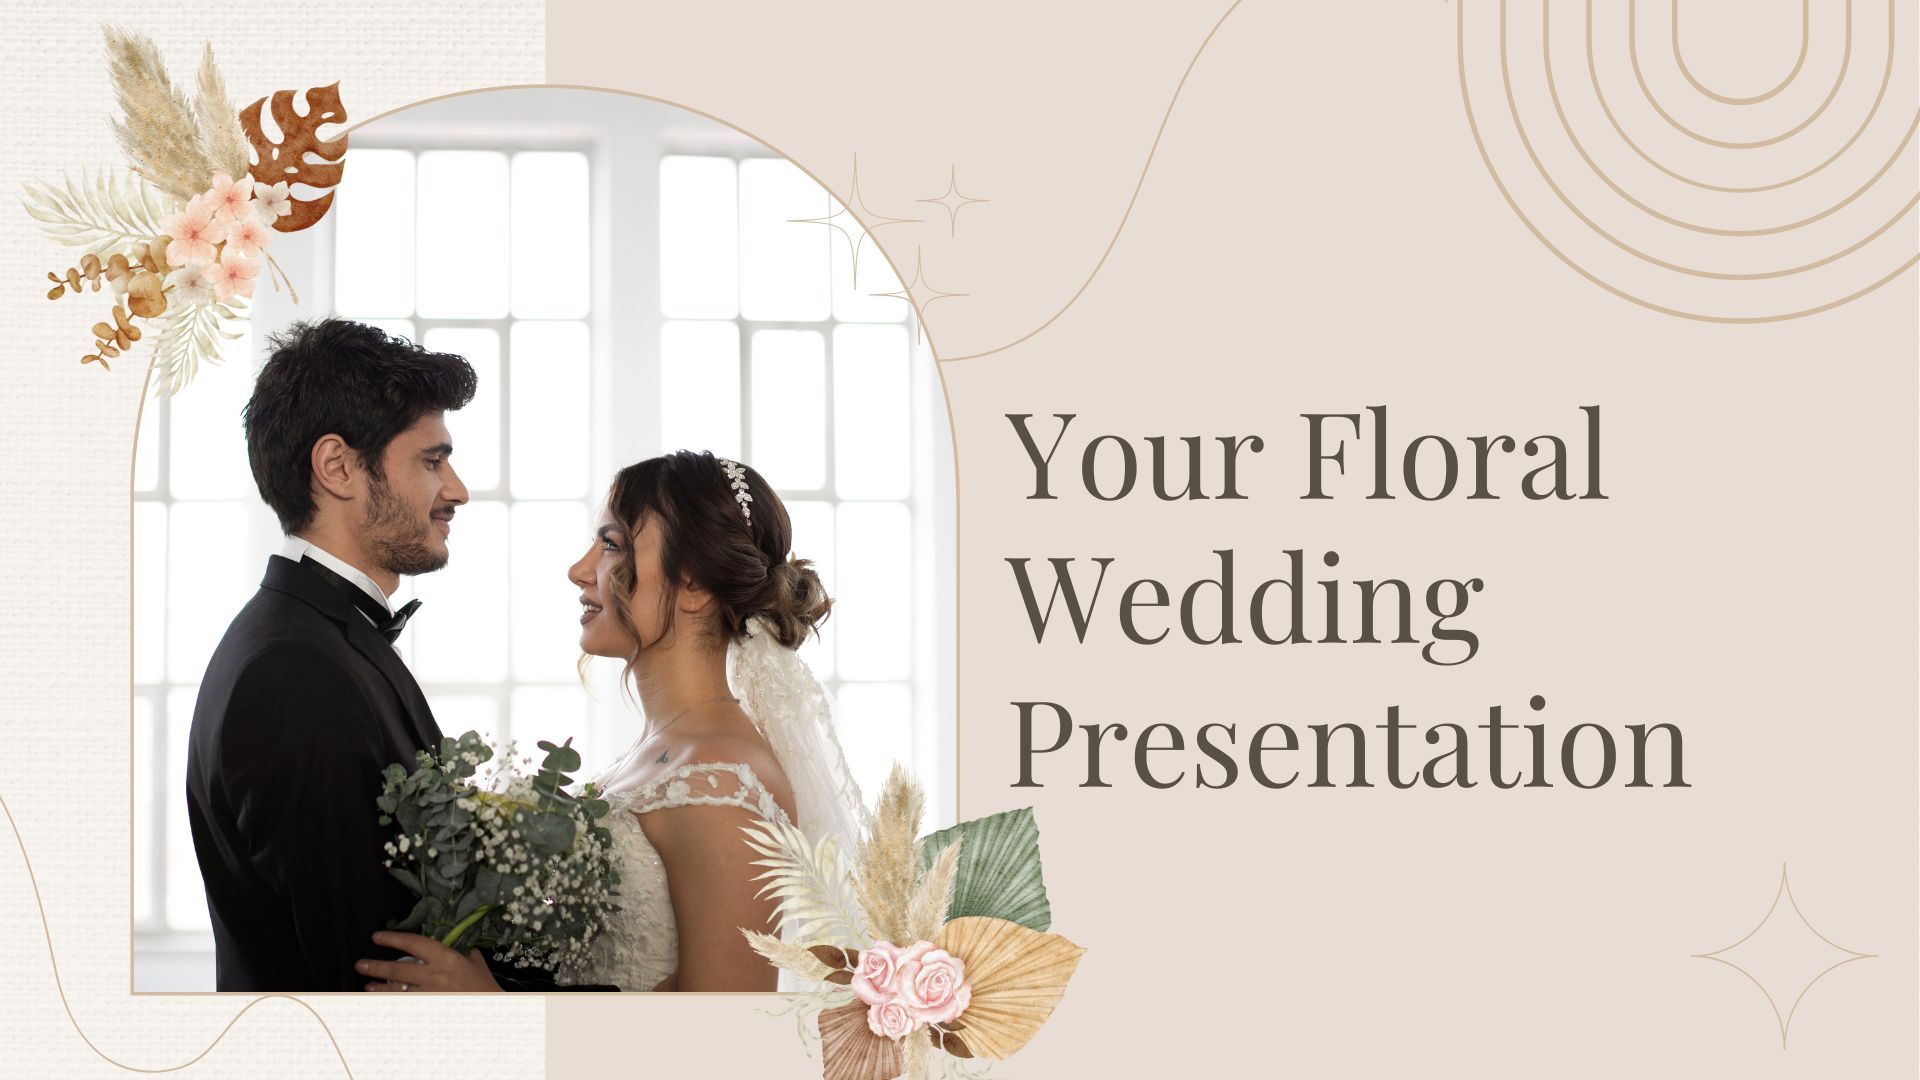 Free PowerPoint templates and Google Slides themes for weddings